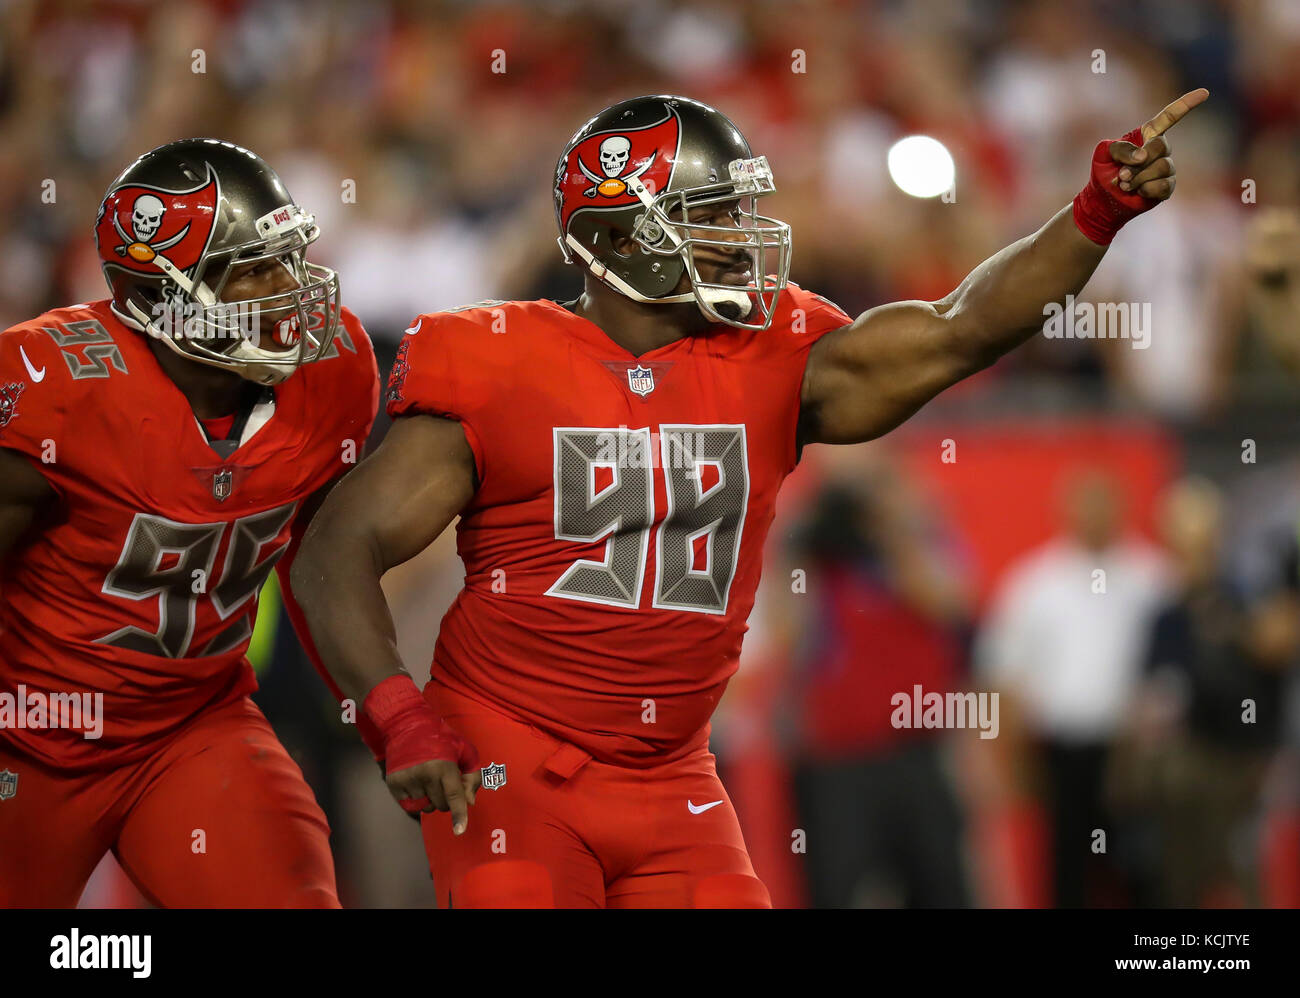 Tampa, Florida, USA. 5th Oct, 2017. MONICA HERNDON | Times.Tampa Bay Buccaneers defensive tackle Clinton McDonald (98) celebrates his sack of New England Patriots quarterback Tom Brady (12) in the first quarter of the Tampa Bay Buccaneers game against the New England Patriots on October 5, 2017 at Raymond James Stadium in Tampa, Fla. Credit: Monica Herndon/Tampa Bay Times/ZUMA Wire/Alamy Live News Stock Photo